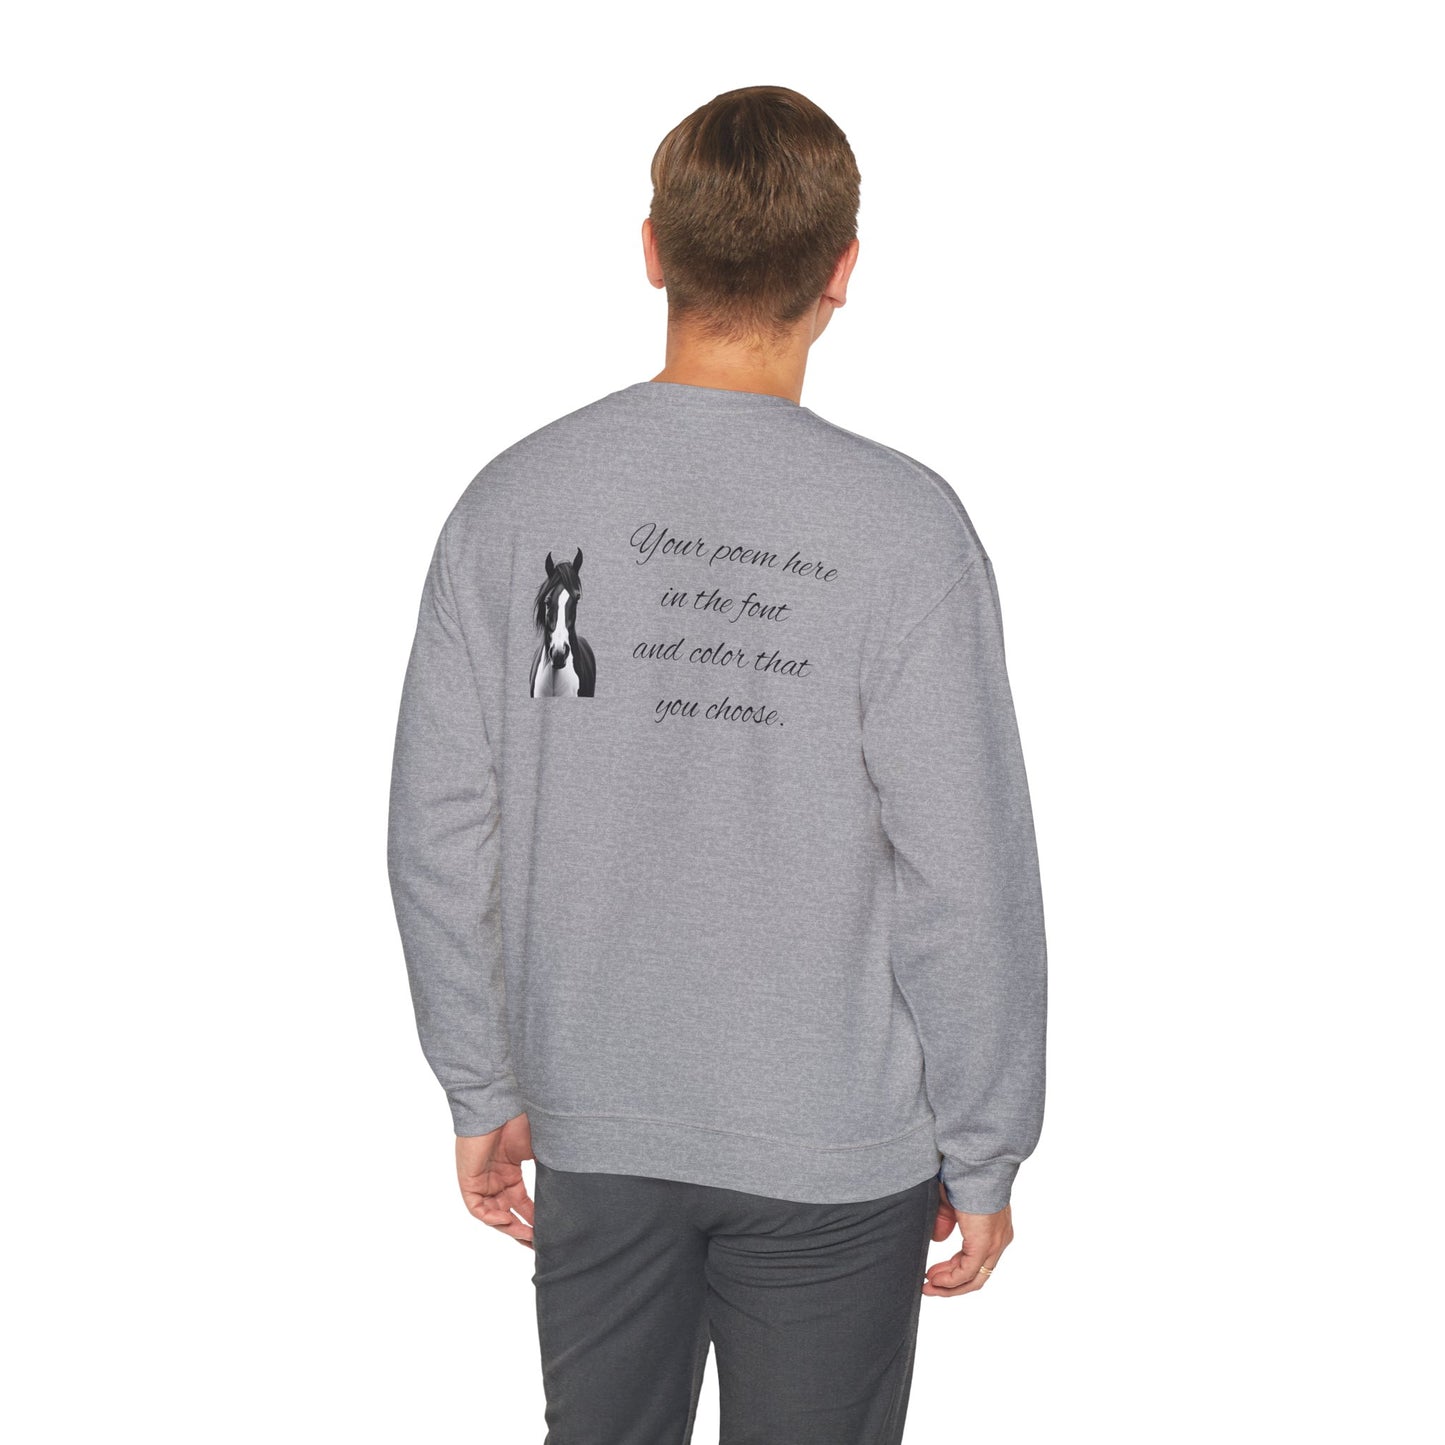 Your Poem On A Sweatshirt With A Horse